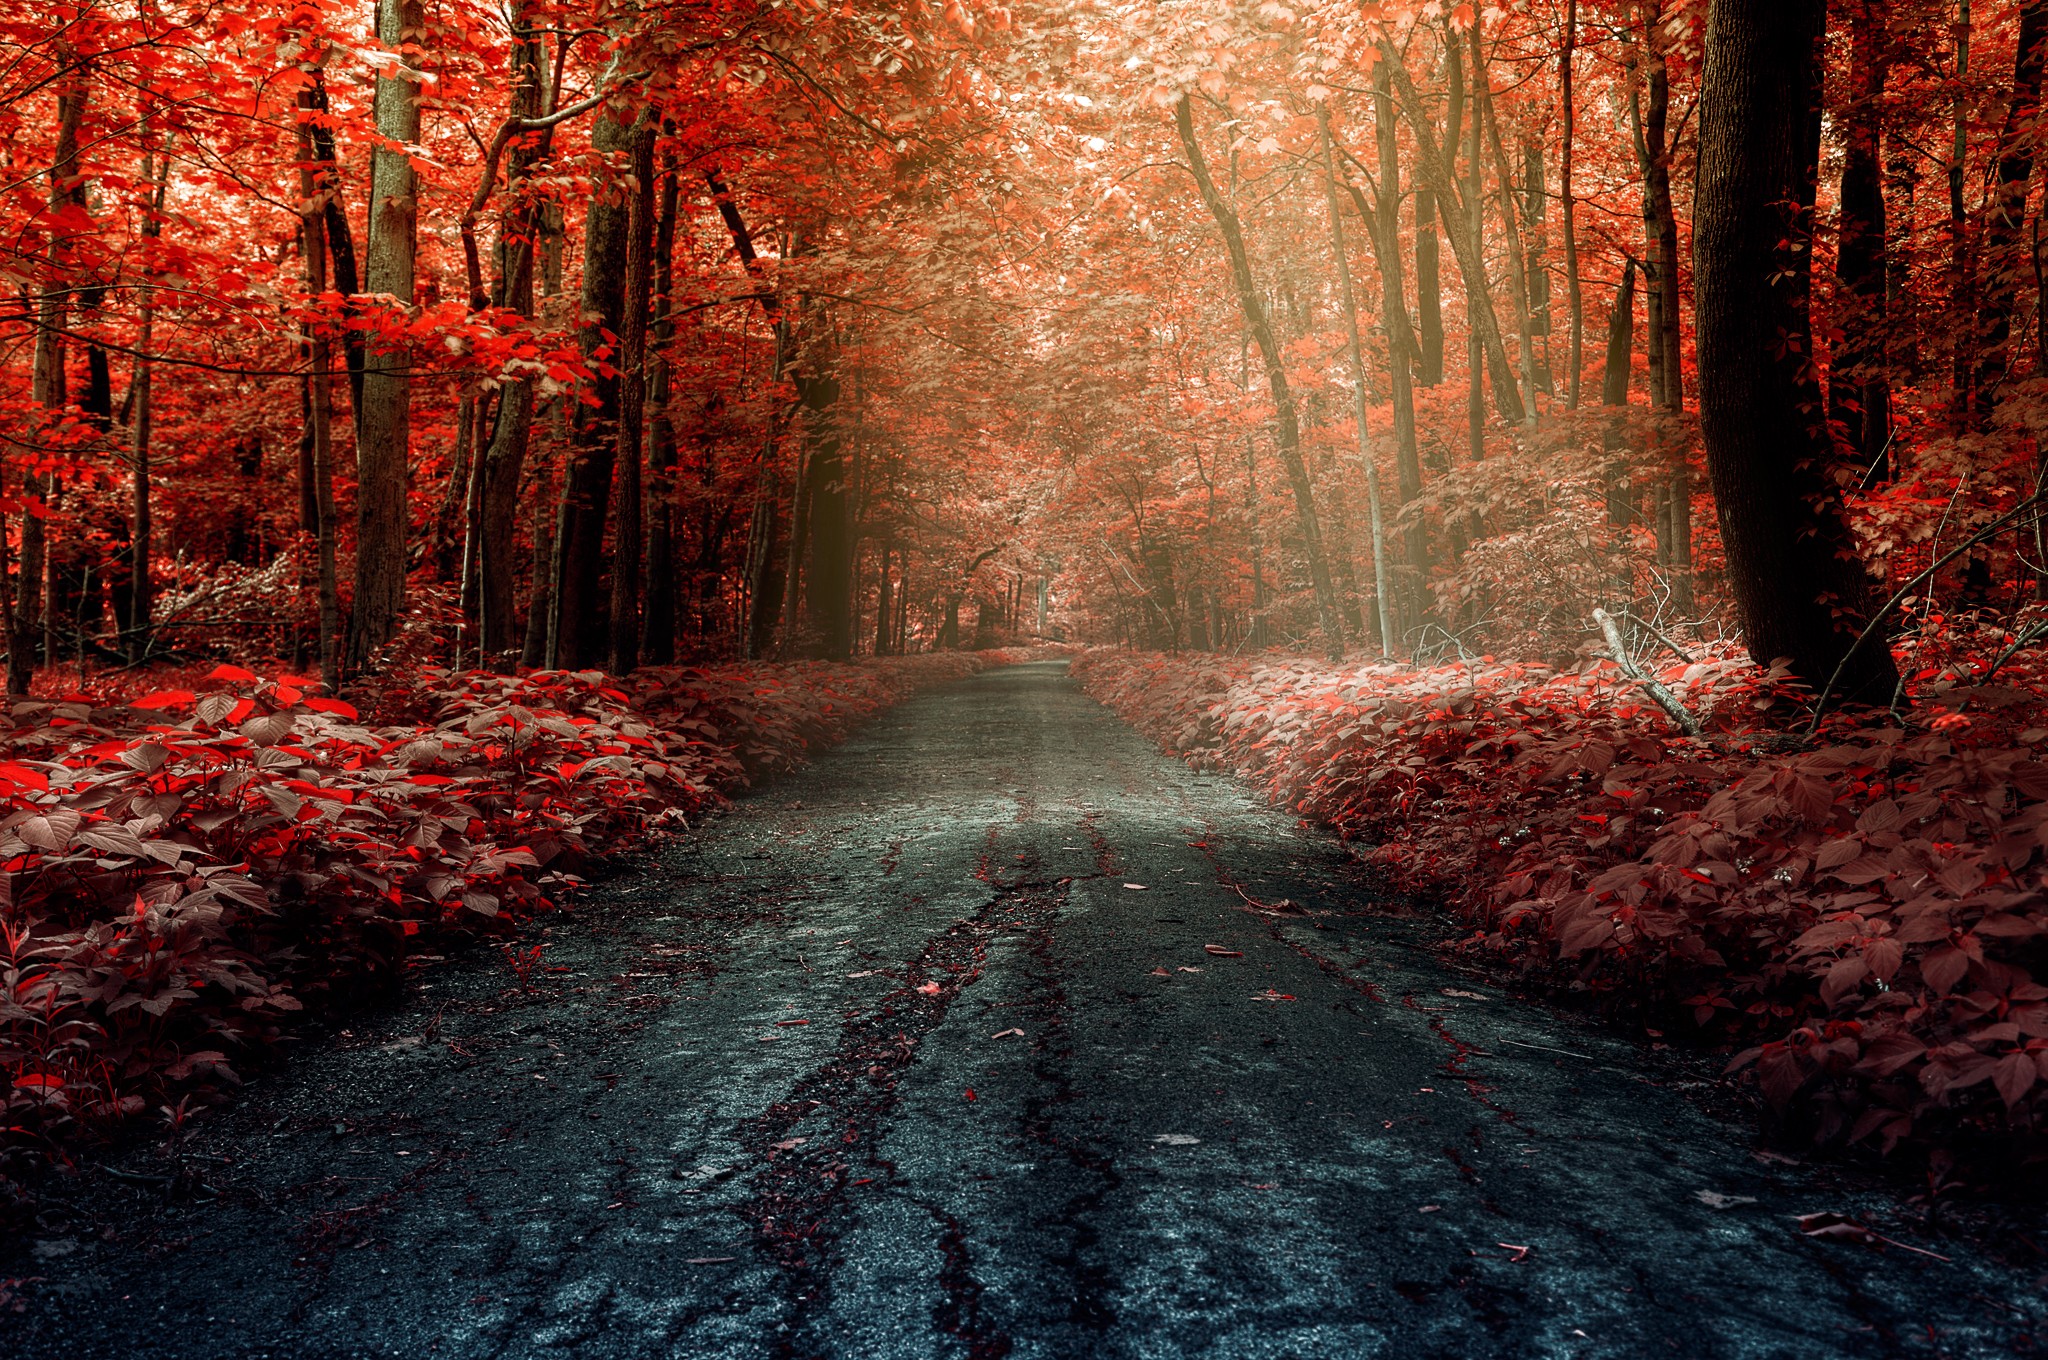 General 2048x1360 forest road trees fall outdoors leaves plants